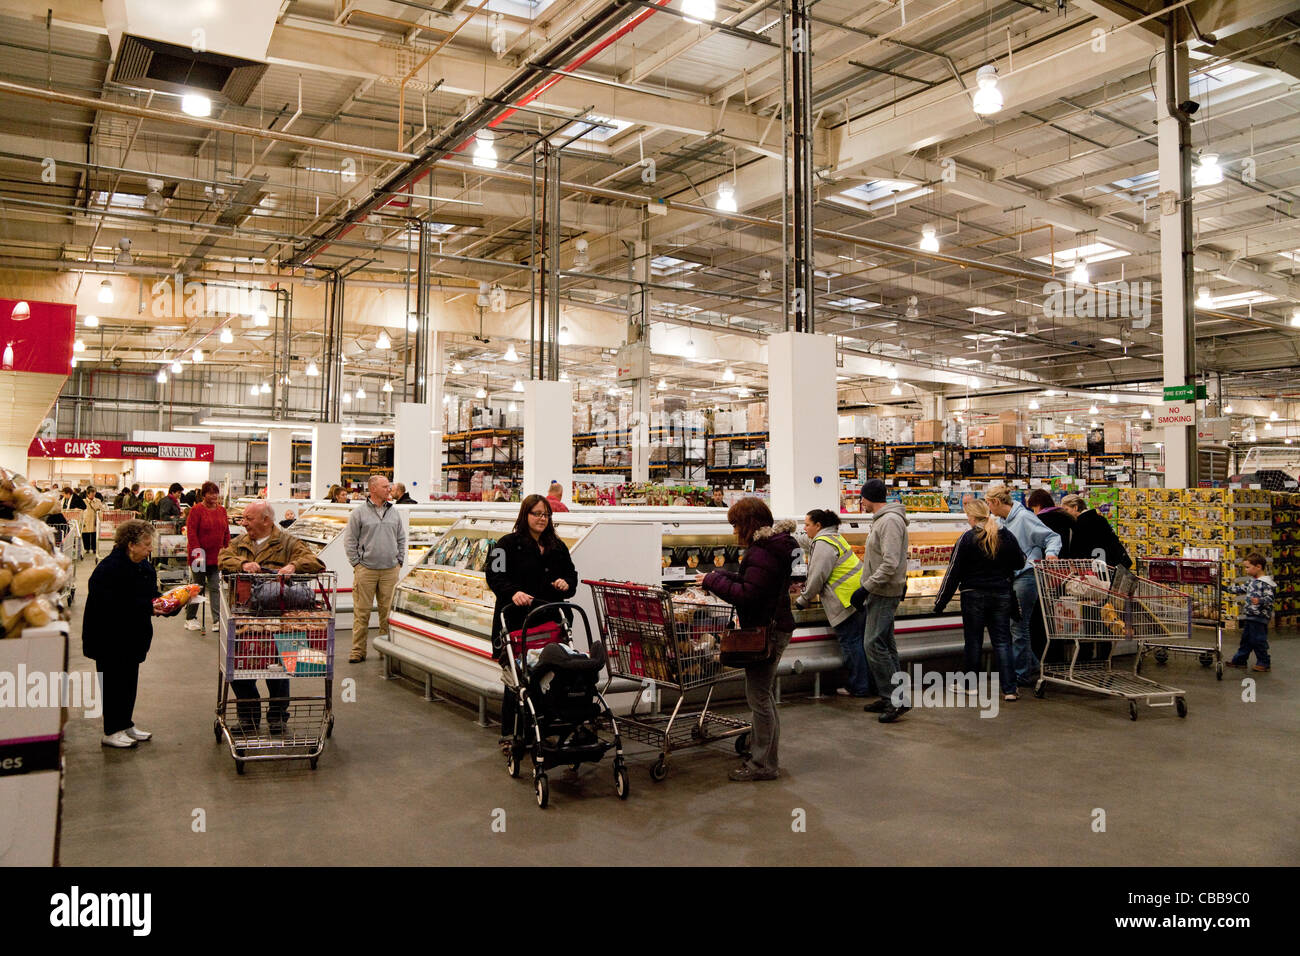 People shopping in the Costco discount warehouse store, Intu, Lakeside UK Stock Photo